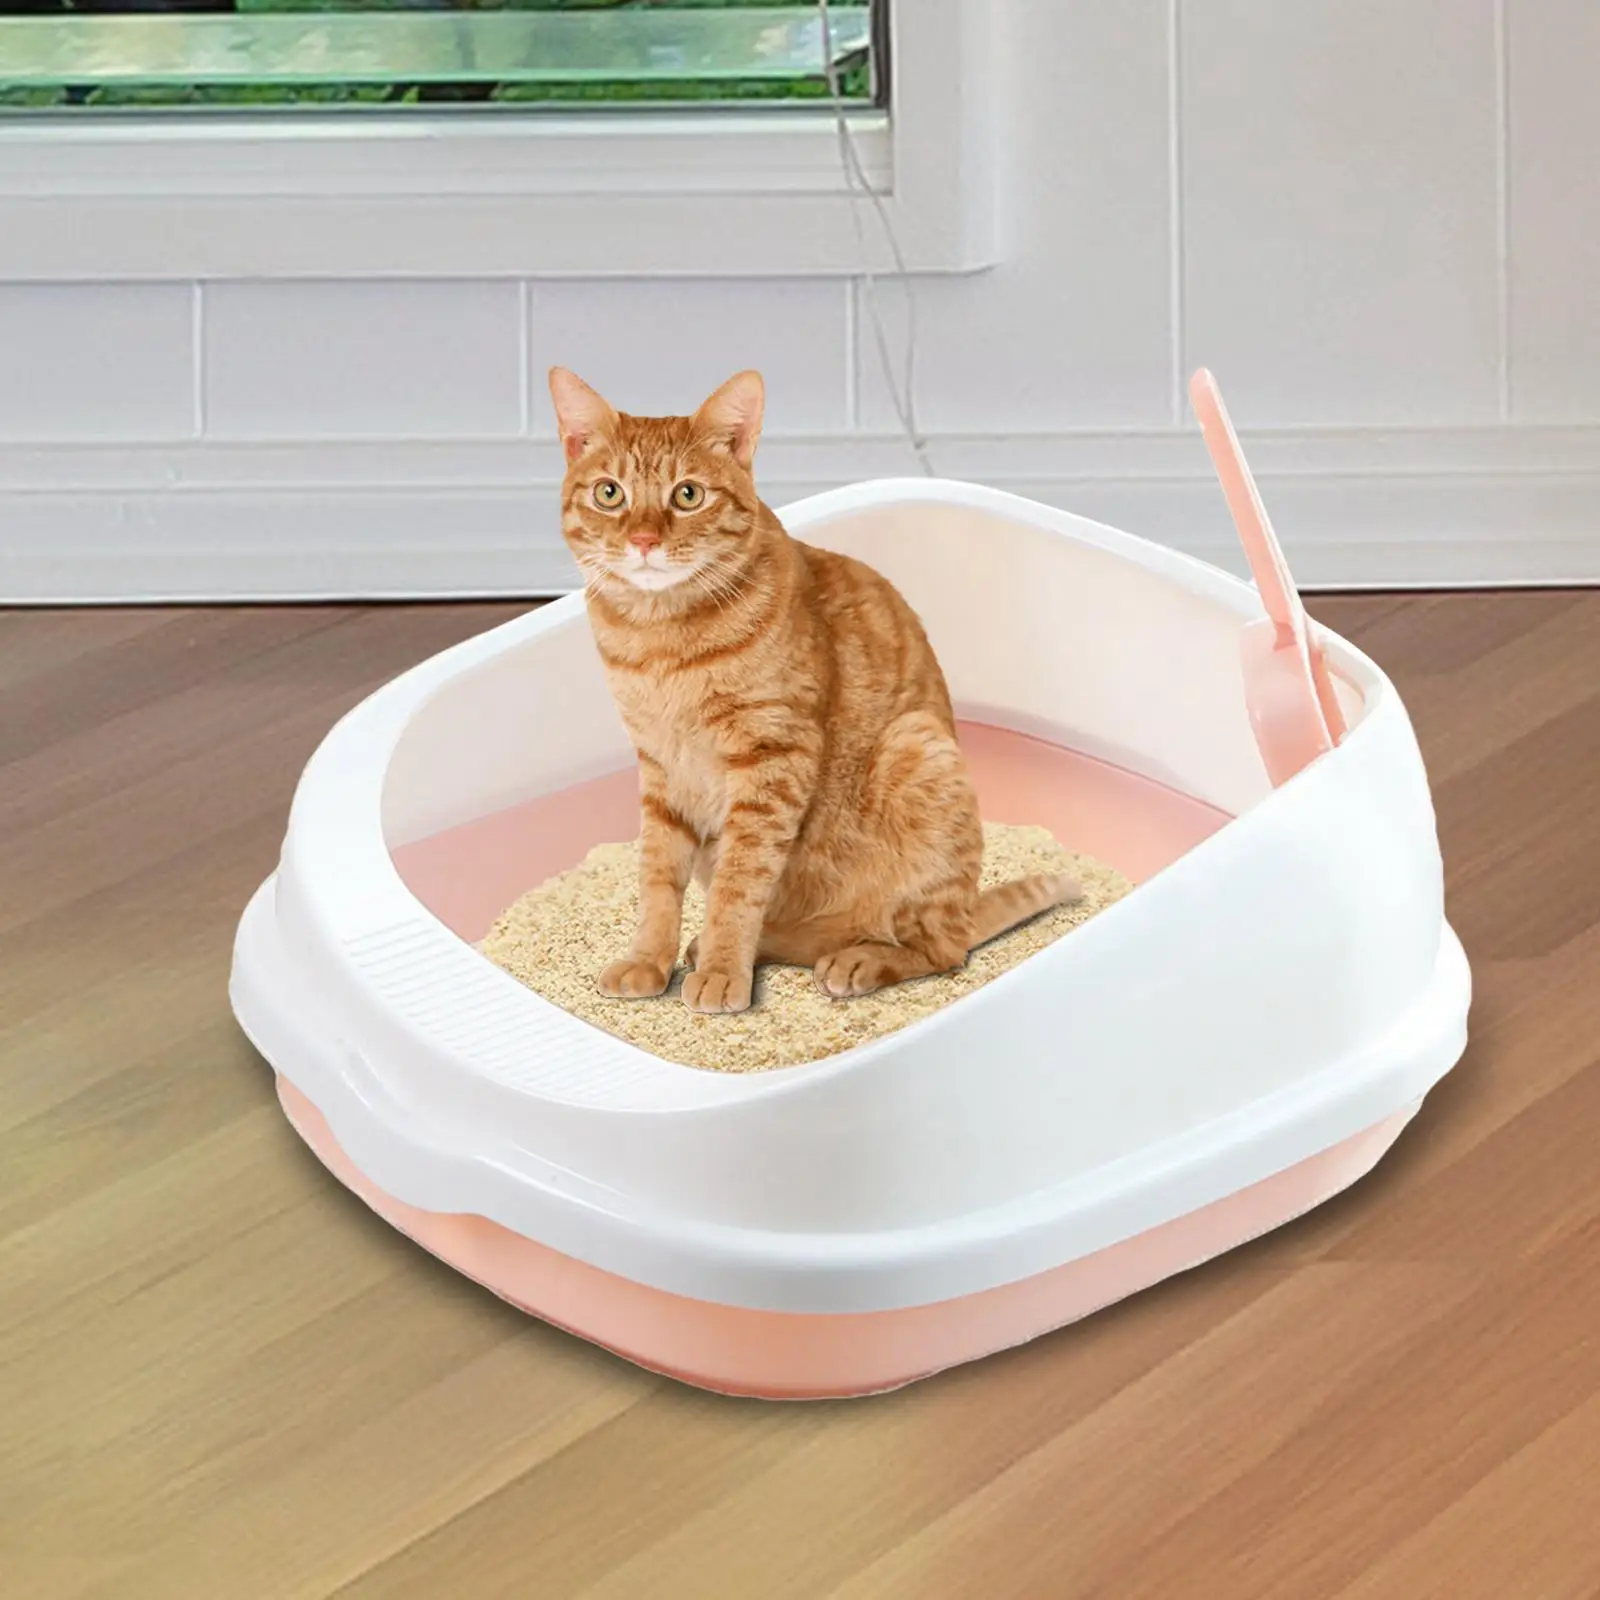 Pet Cat Litter Box Toilet Durable Semi Closed Sand Box Large Space Detachable Easy Clean Splashproof Tray for Kitten Accessories